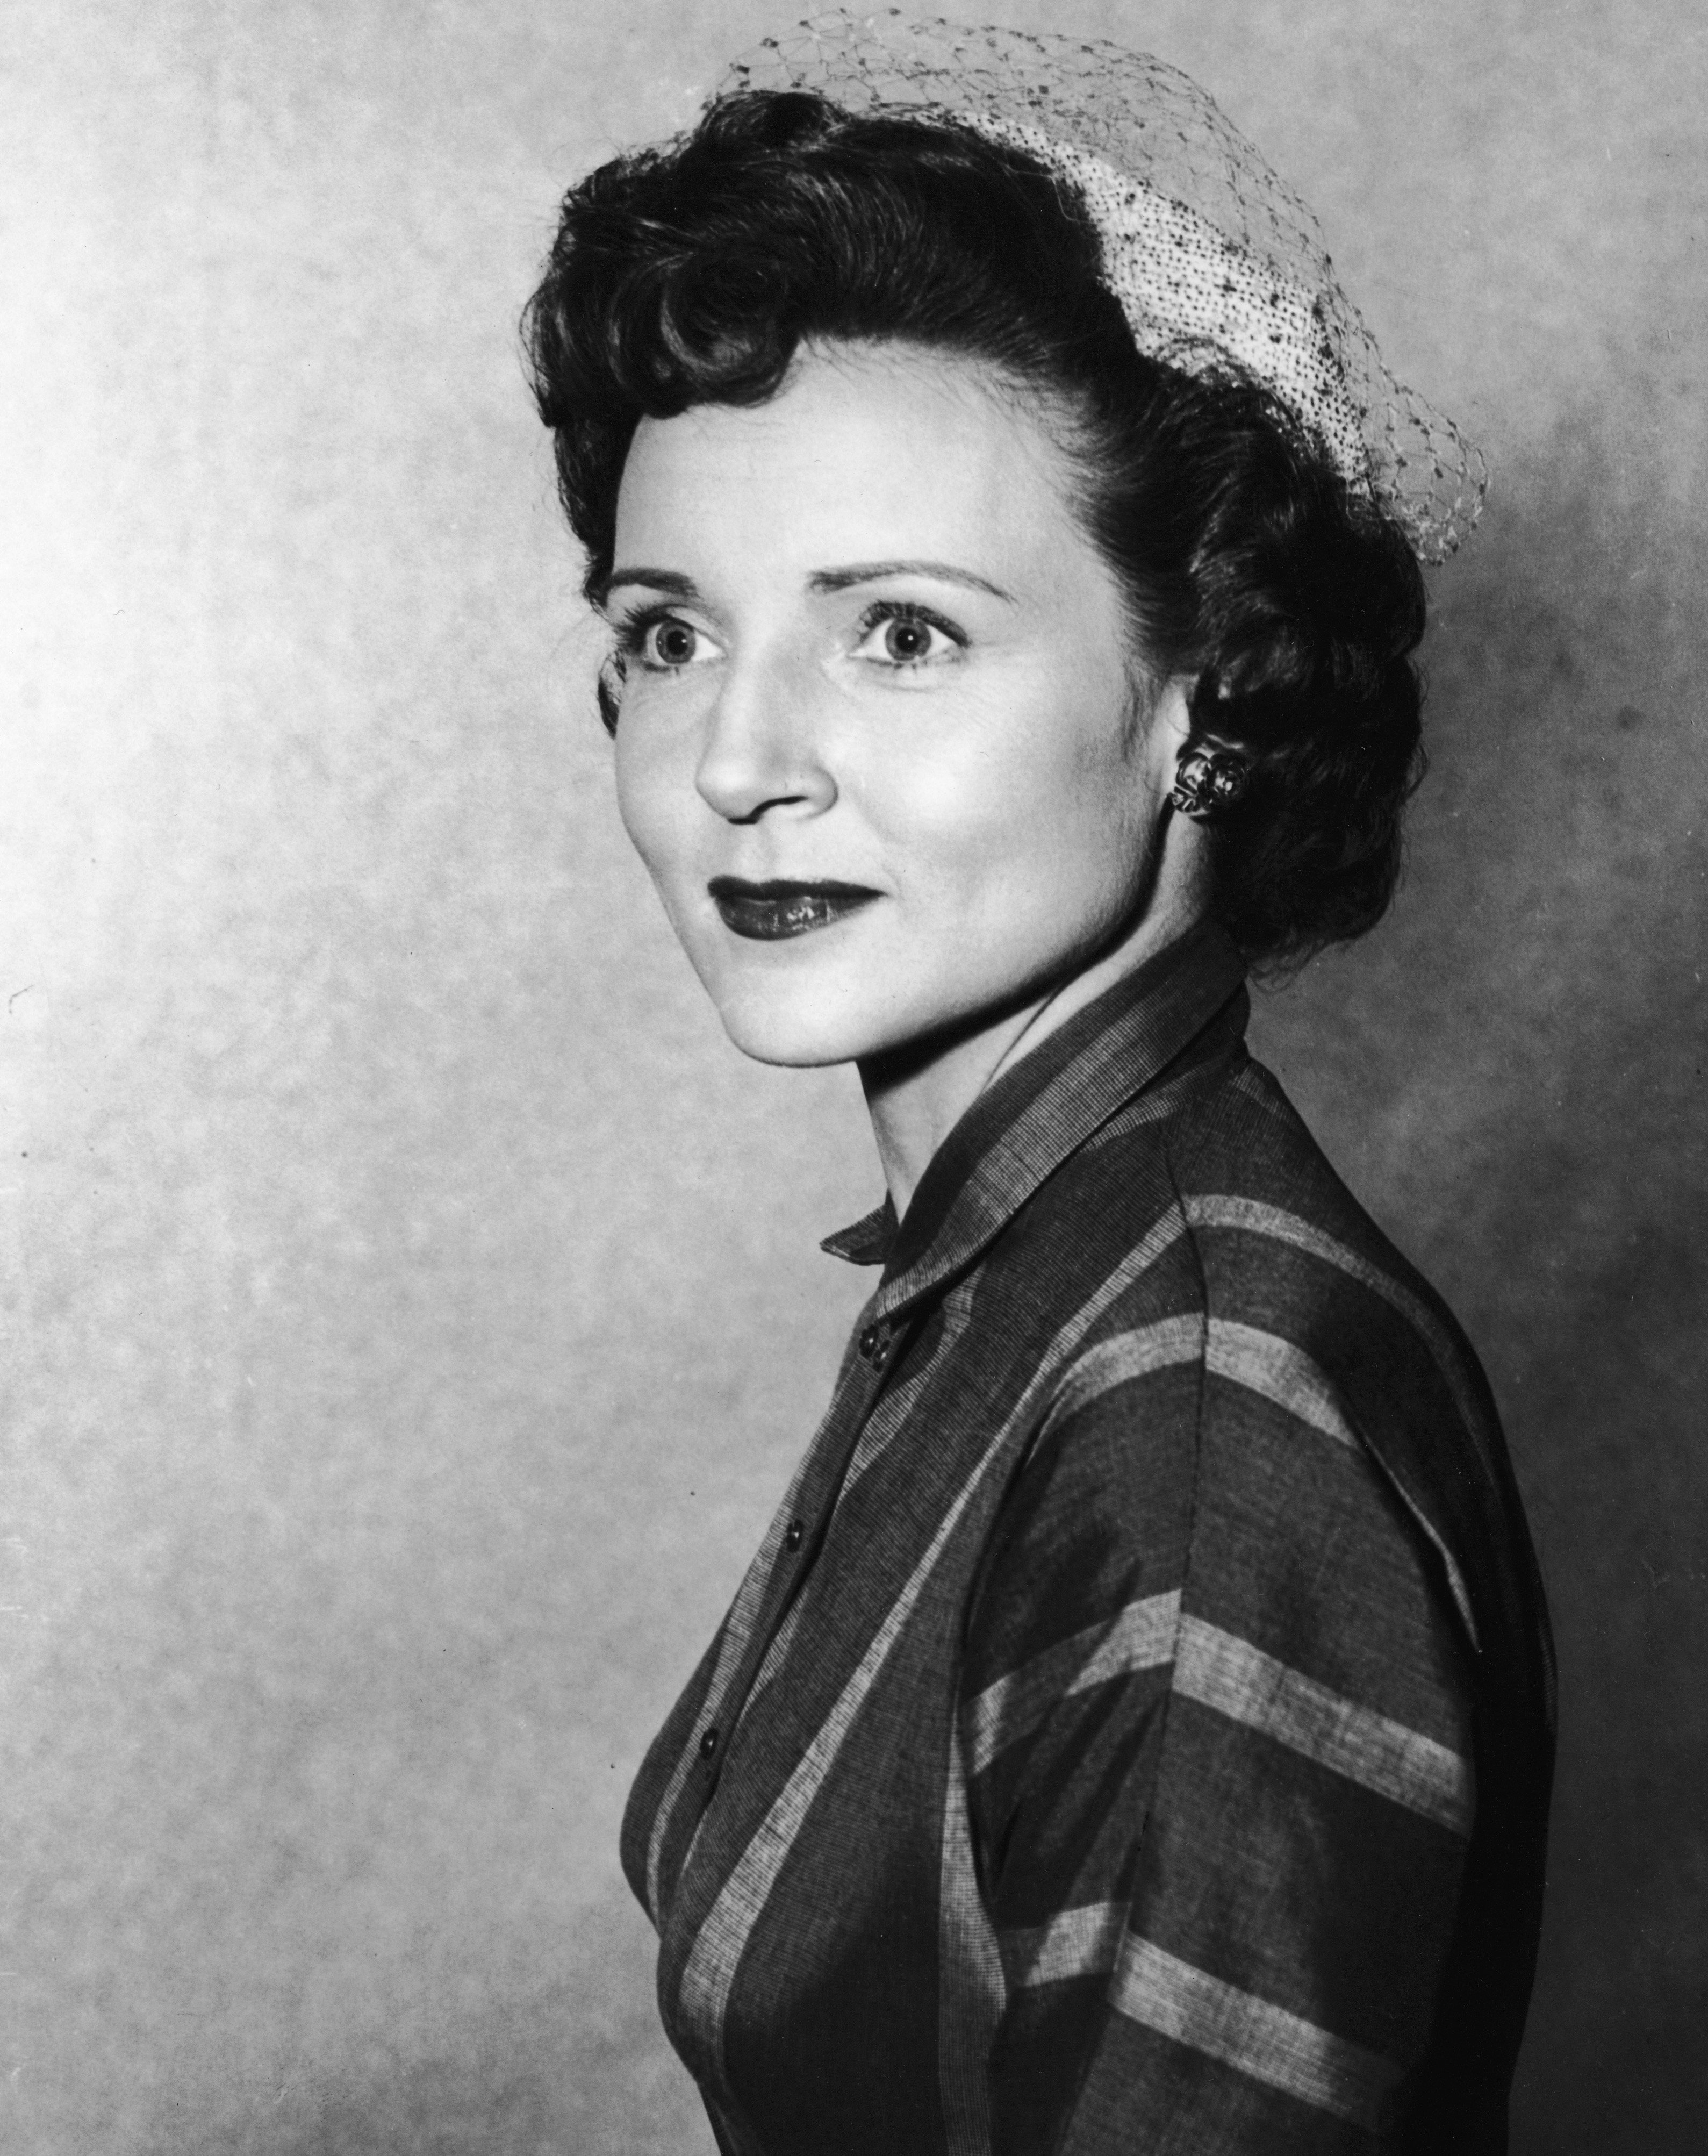 A headshot portrait of Betty White wearing a veiled hat, circa 1955 | Photo: GettyImages